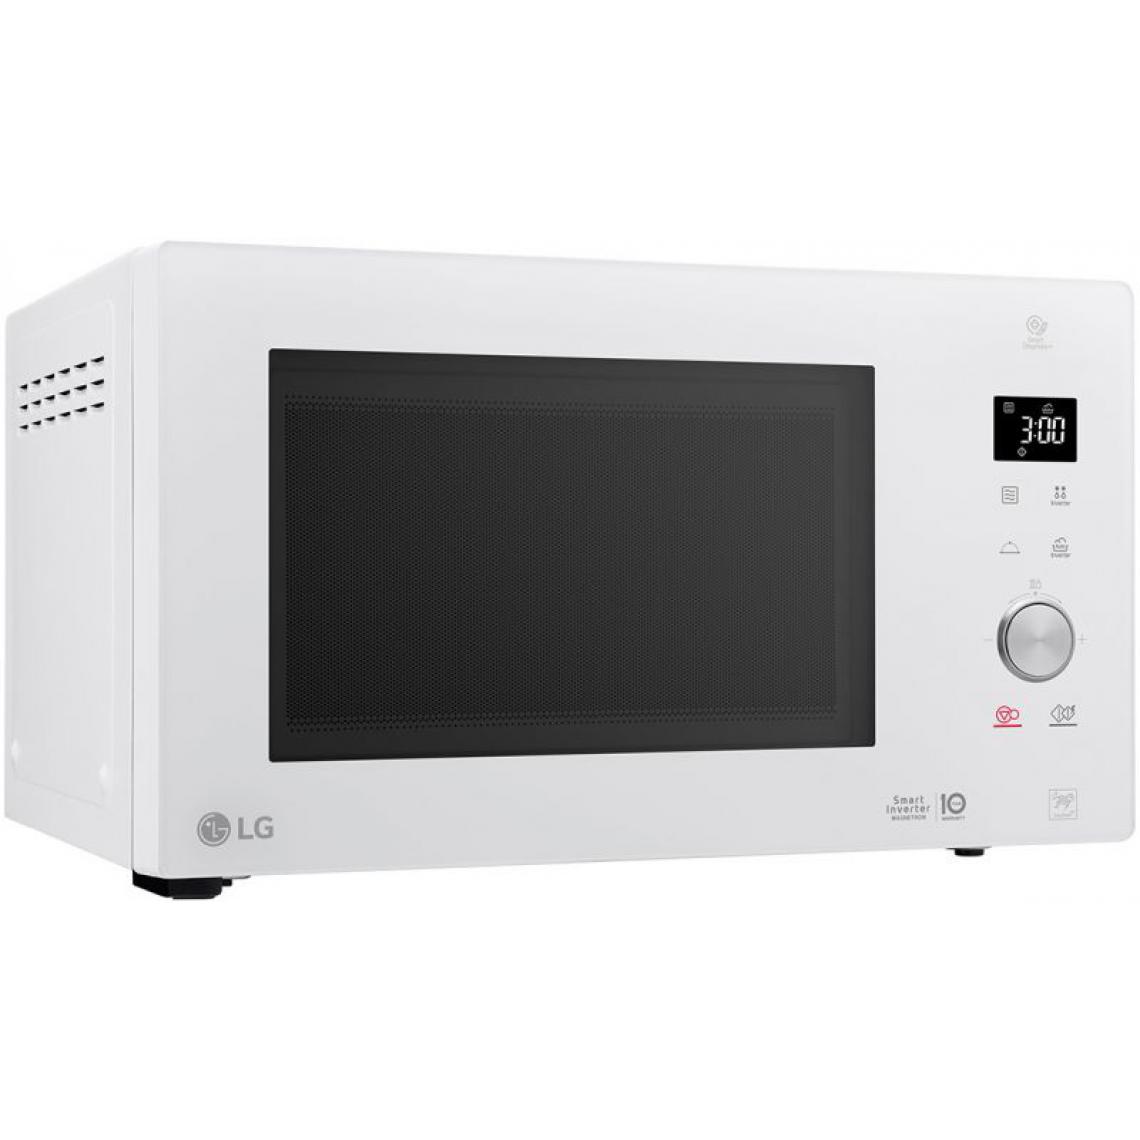 LG - Micro ondes MS3265DDH - Four micro-ondes